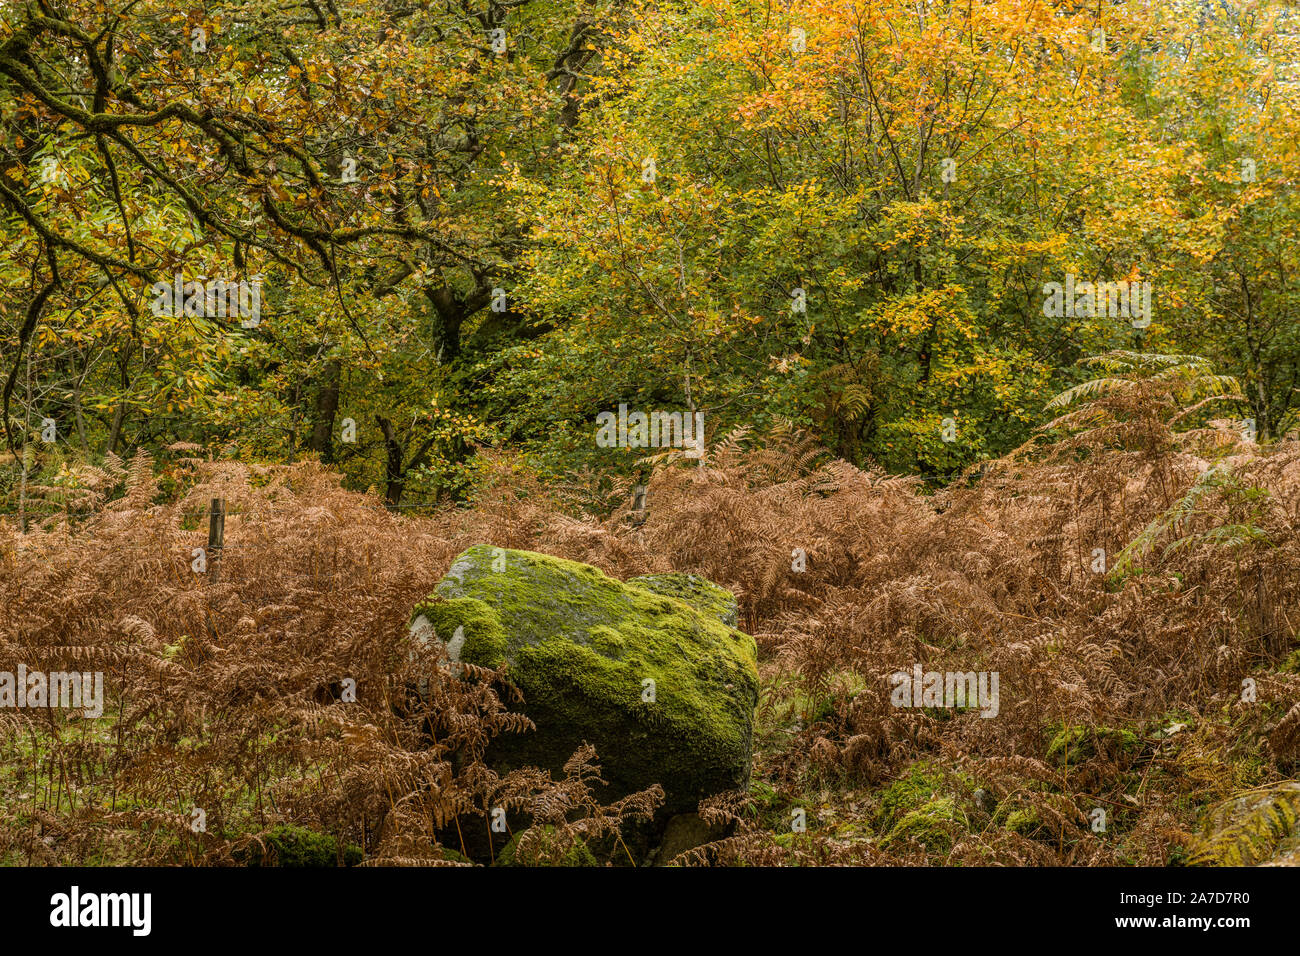 Autumn woodlands at Burrator Reservoir in the Dartmoor National Park Devon West of England. This is at the top of the reservoir on an October Day. Stock Photo